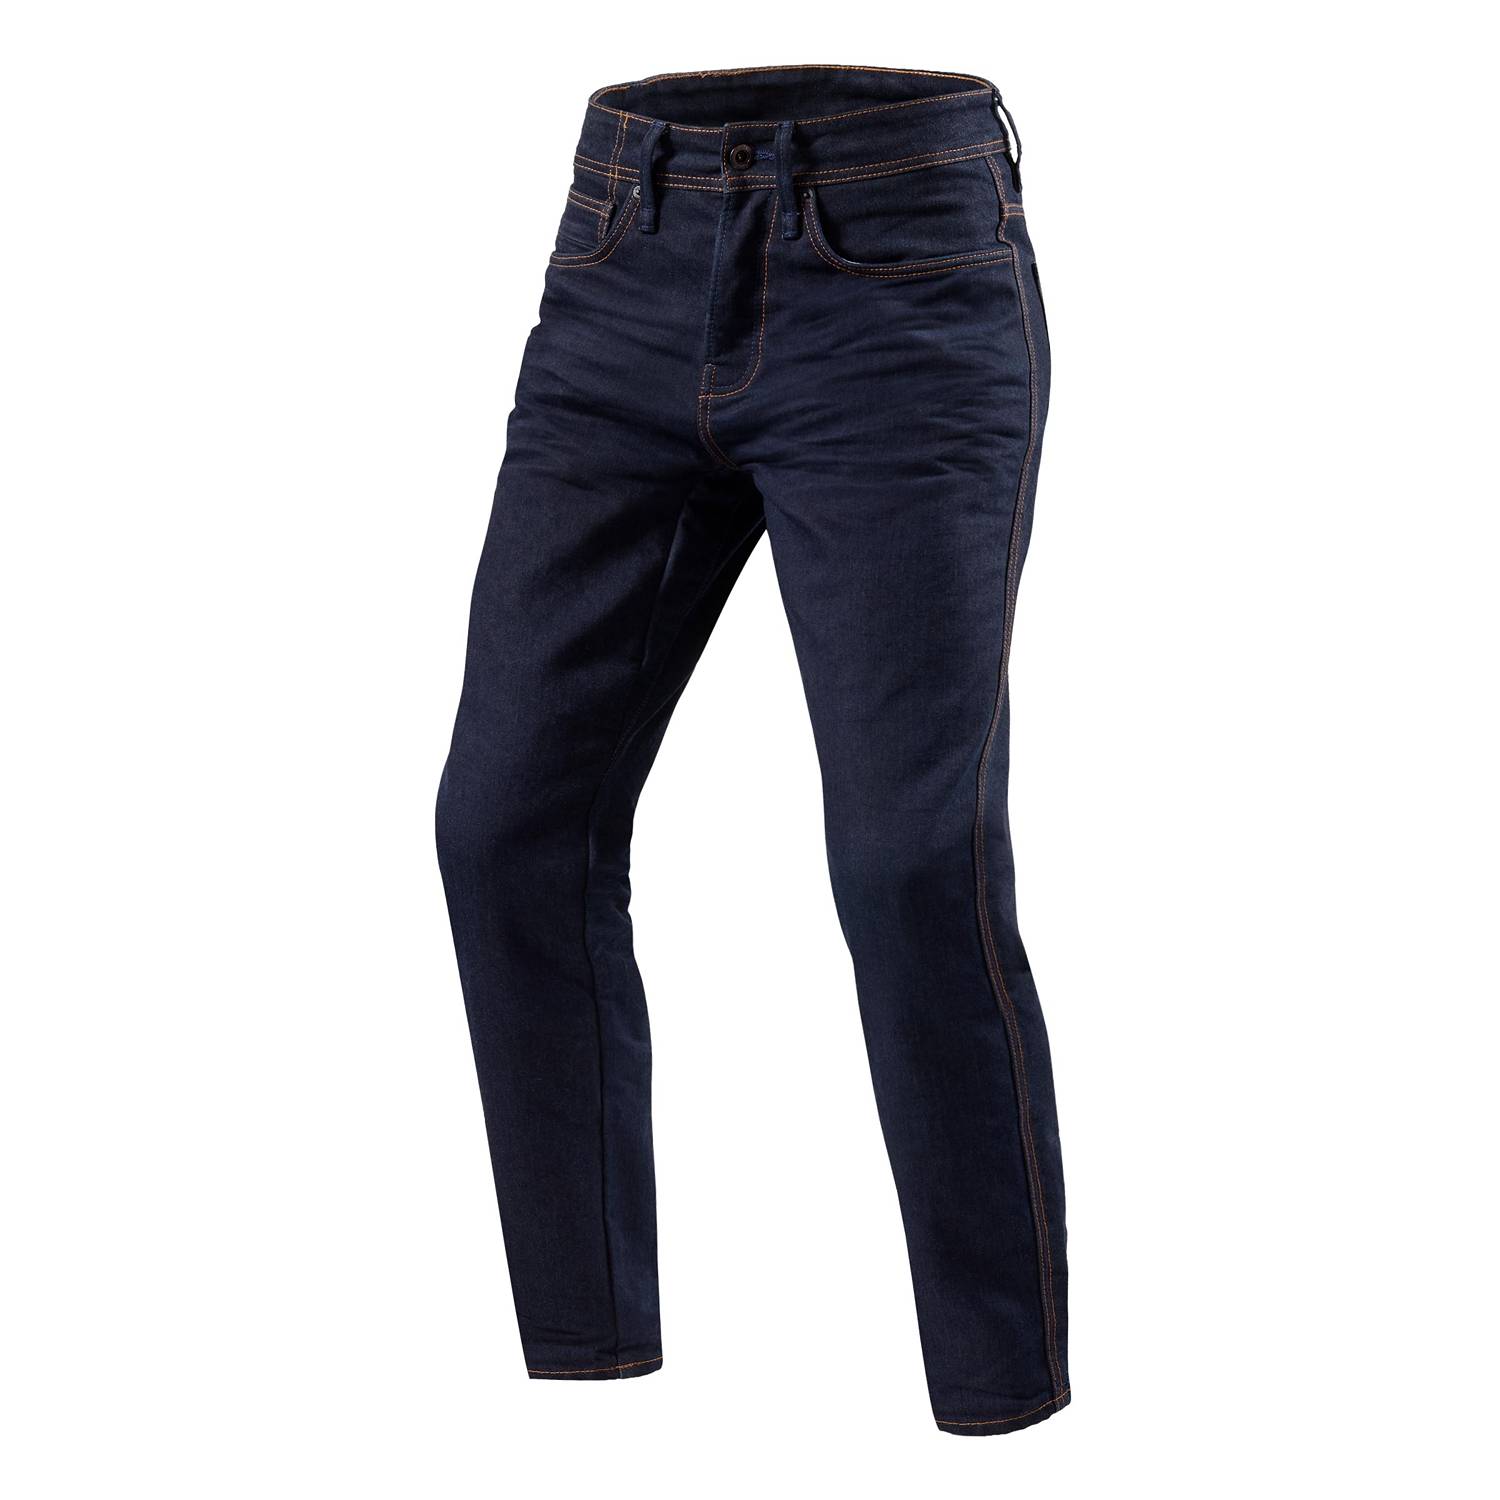 Image of REV'IT! Jeans Reed RF Dark Blue Used Motorcycle Jeans Size L32/W28 ID 8700001336956